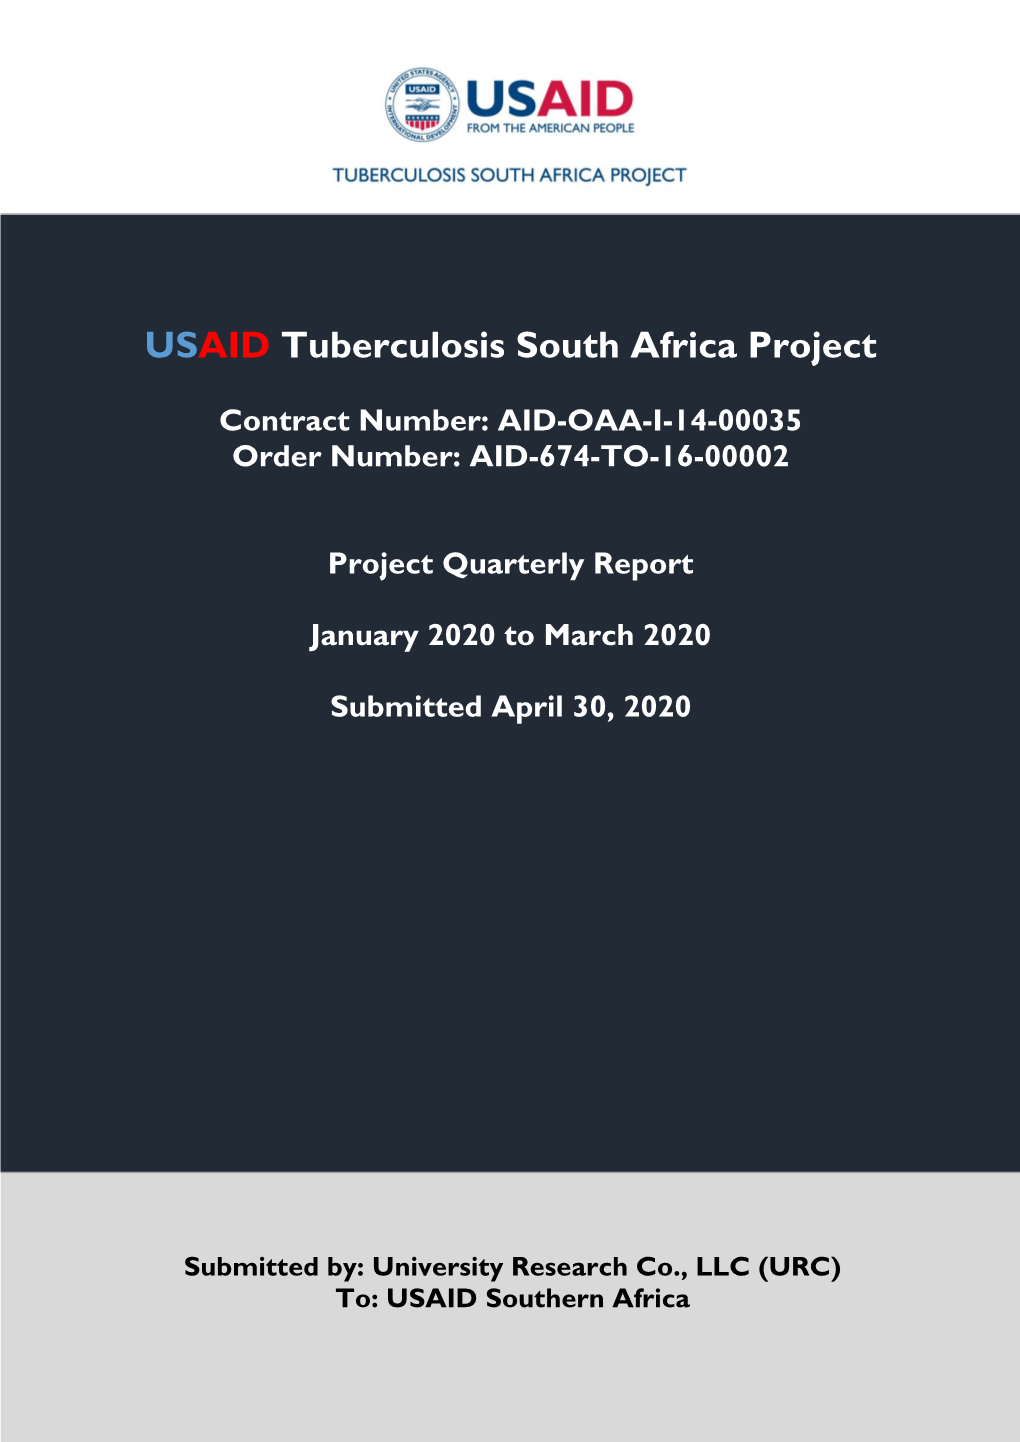 USAID Tuberculosis South Africa Project